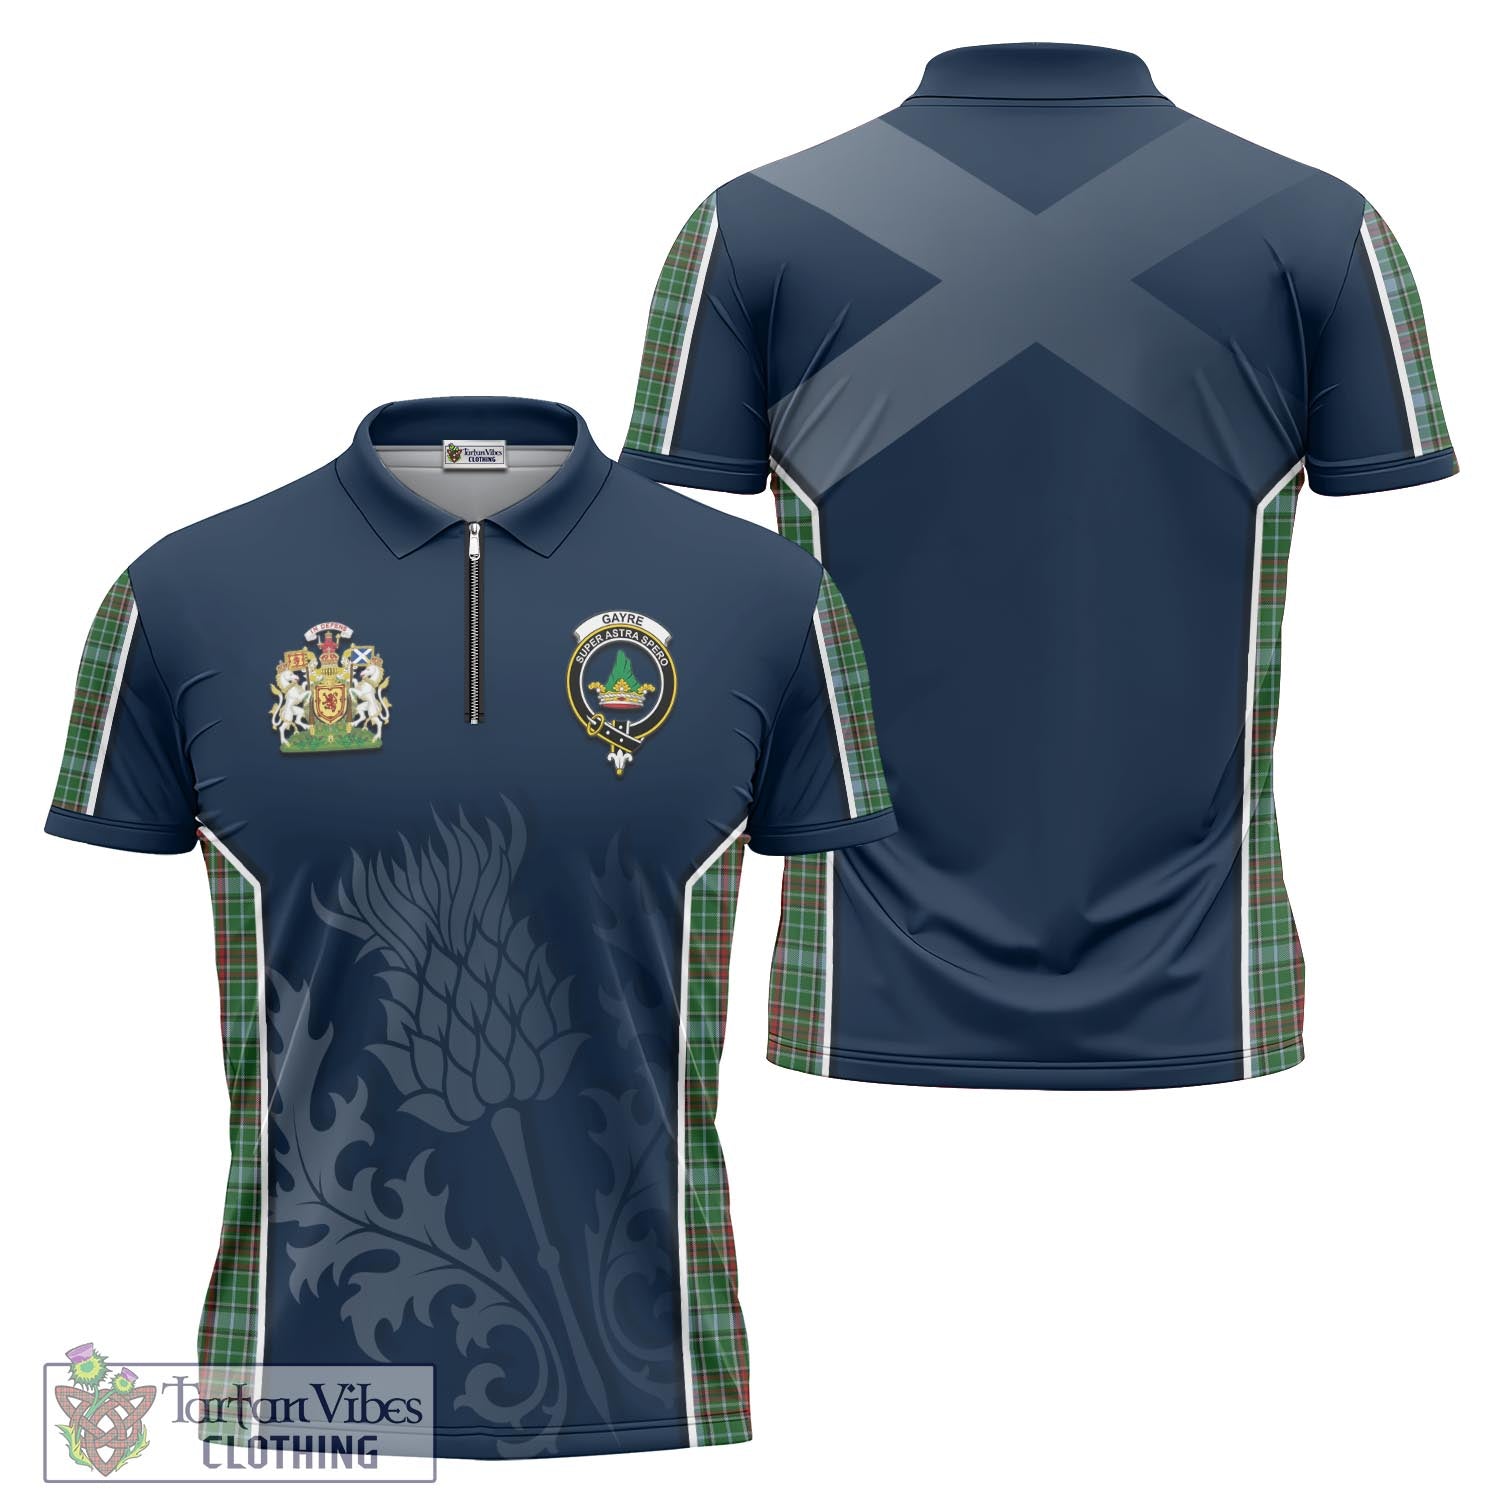 Tartan Vibes Clothing Gayre Tartan Zipper Polo Shirt with Family Crest and Scottish Thistle Vibes Sport Style